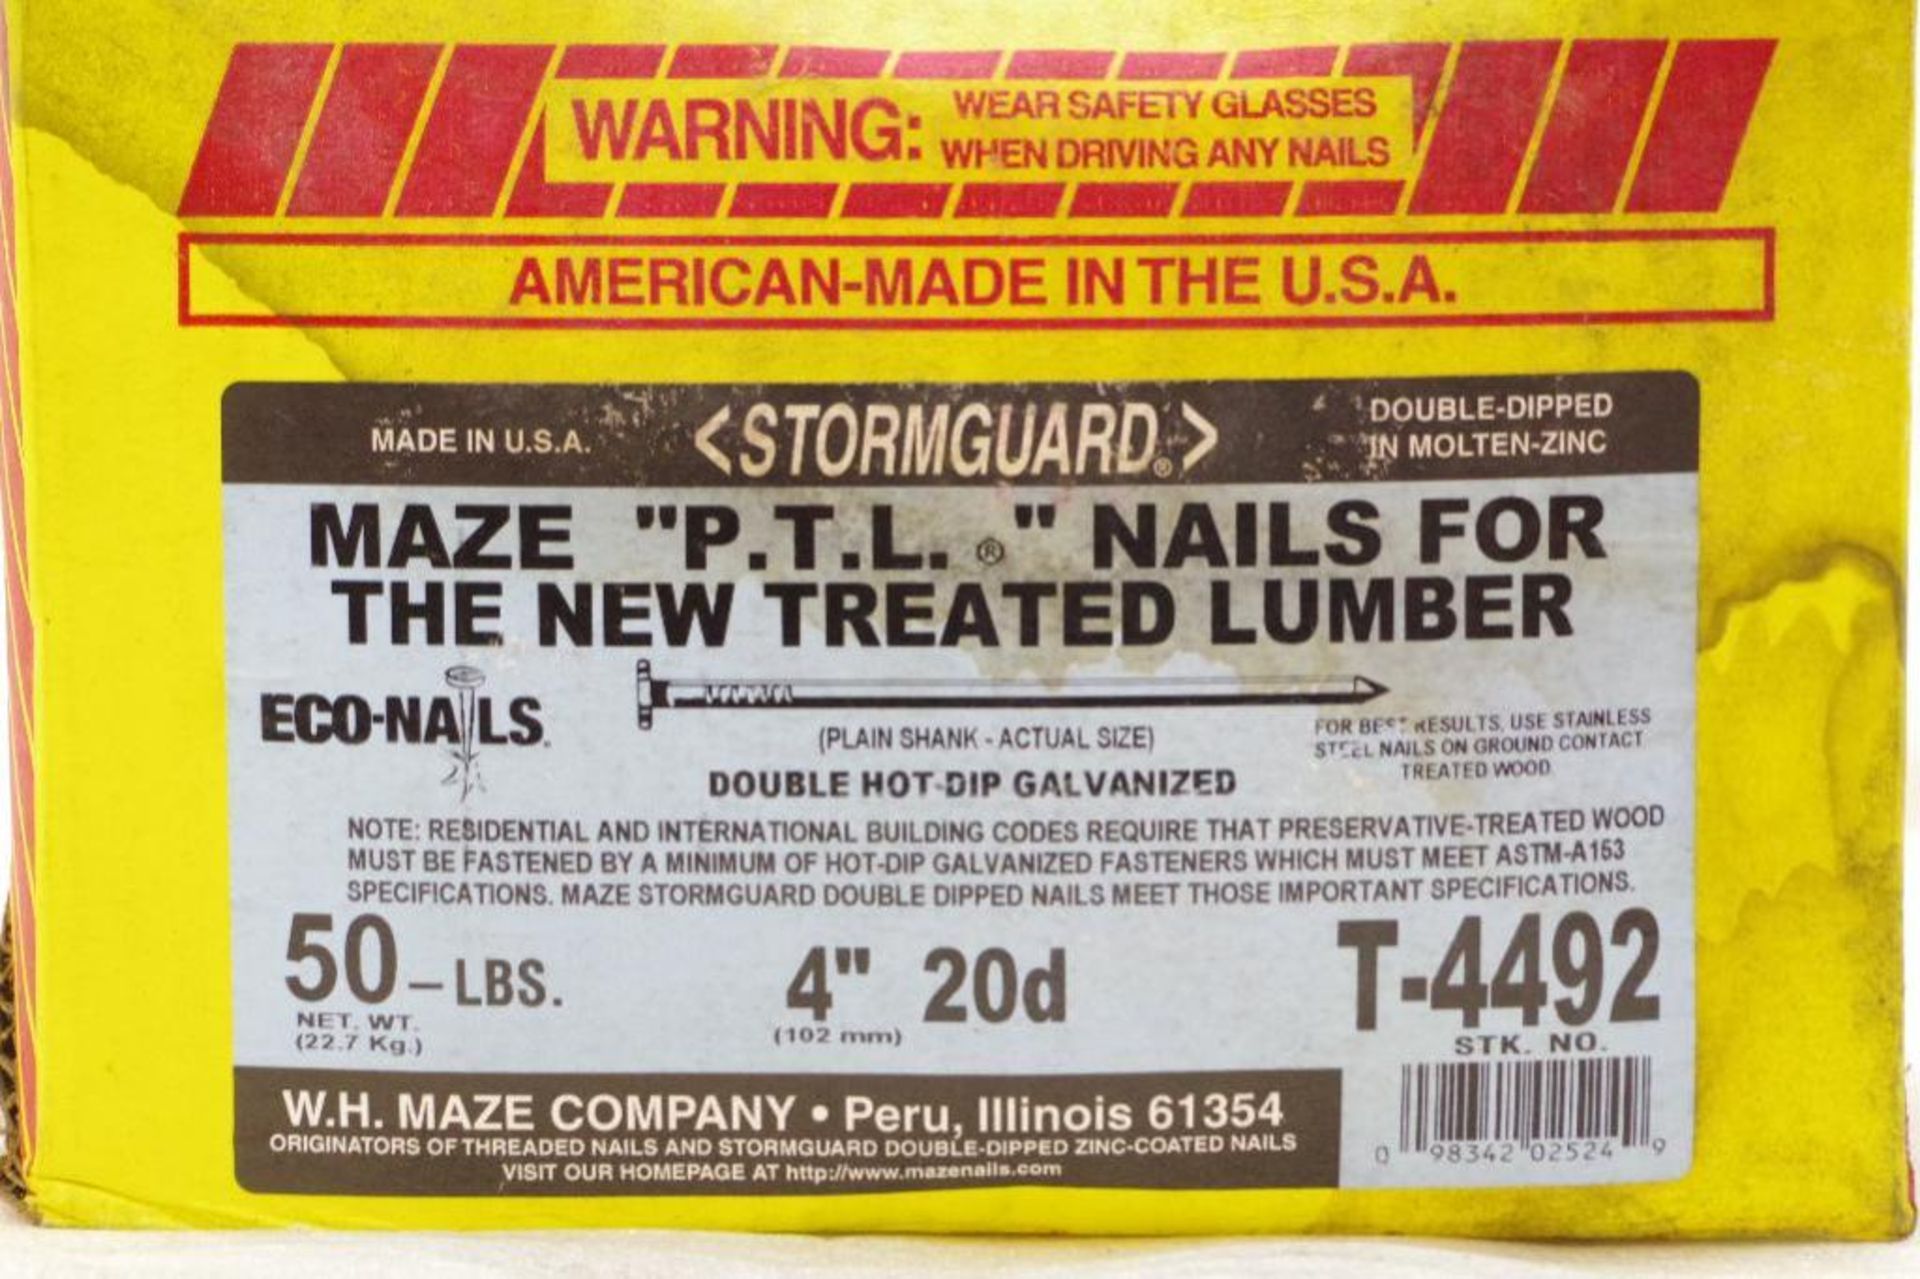 (50) Lbs. MAZE Stormguard "PTL" Nails 4" 20d M/N T-4492, Made in USA (1 Box of 50 Lbs.) - Image 2 of 5